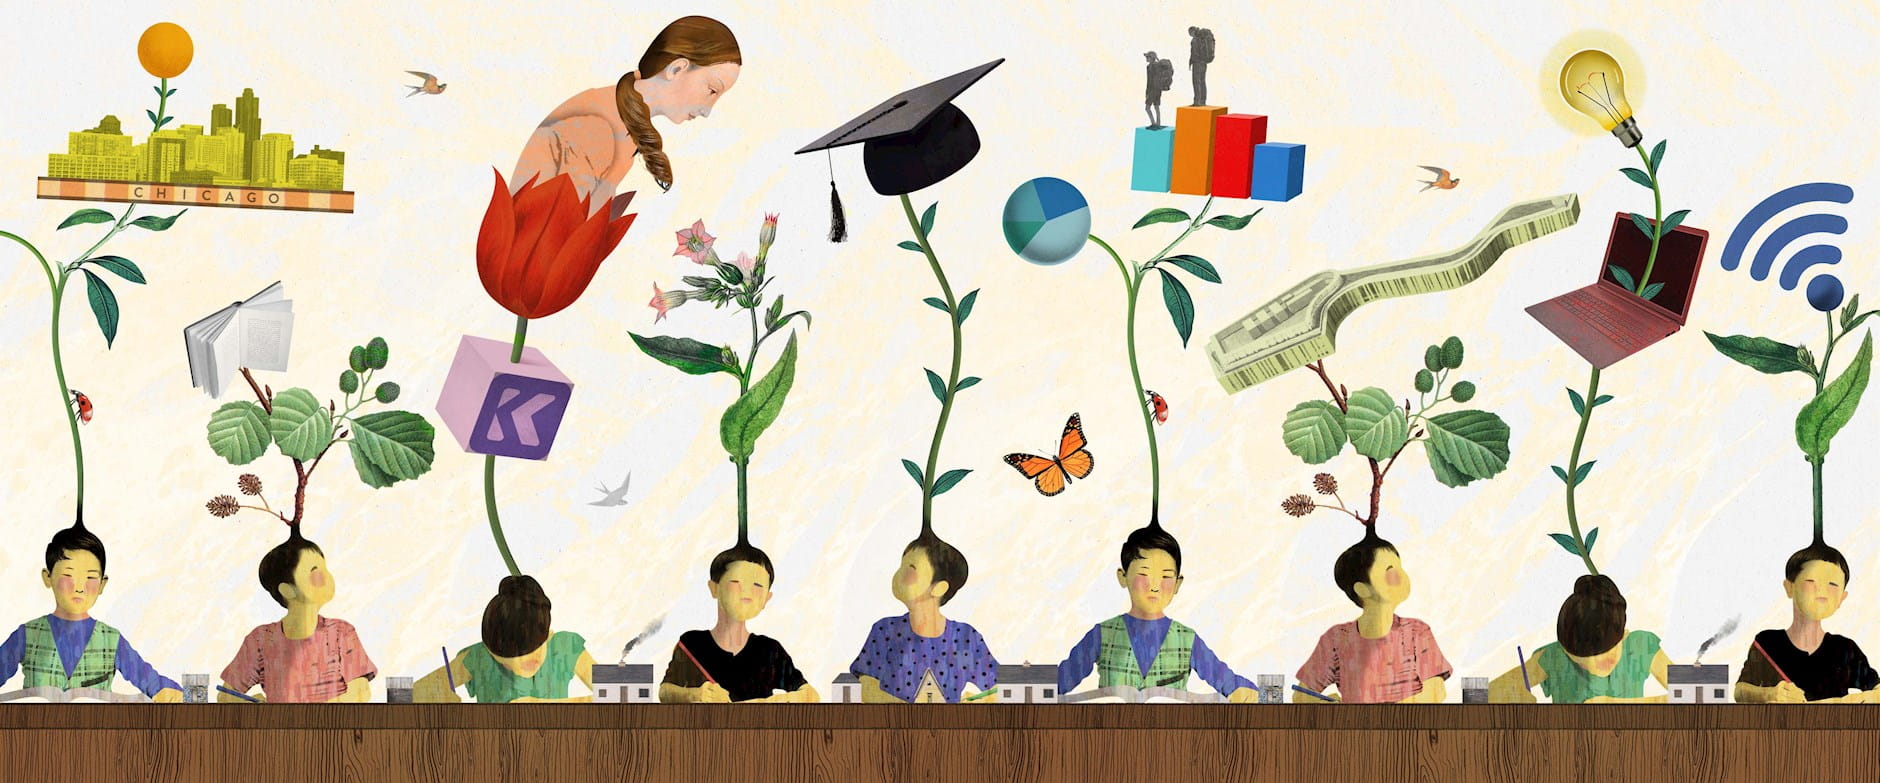 Students illustrated with plants and education icons